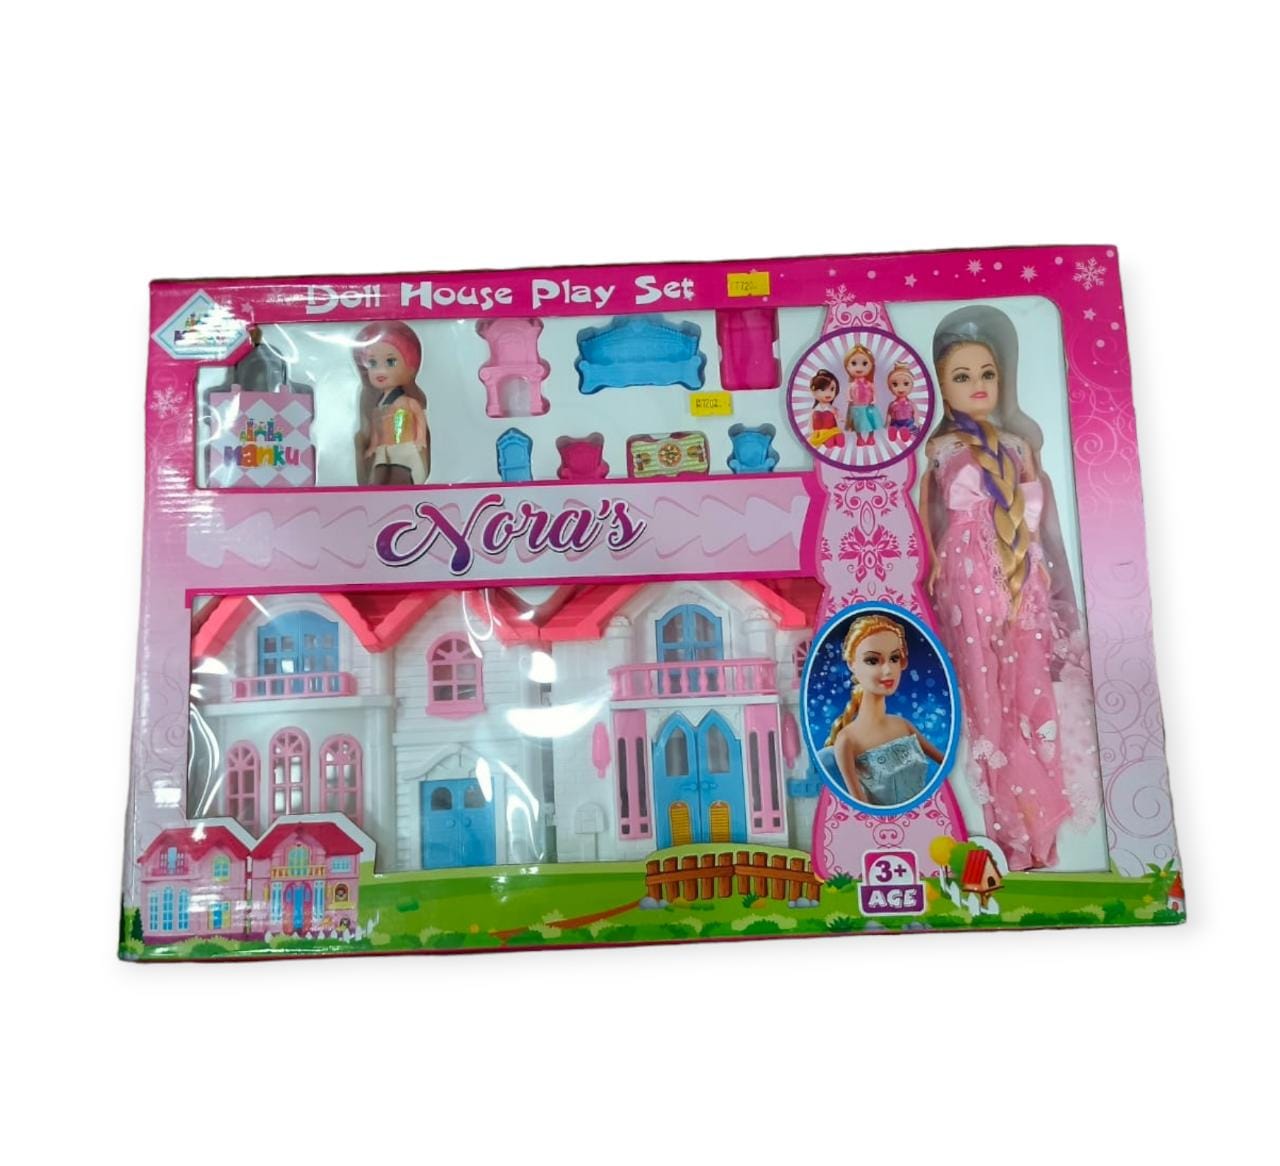 Noras doll house play set 